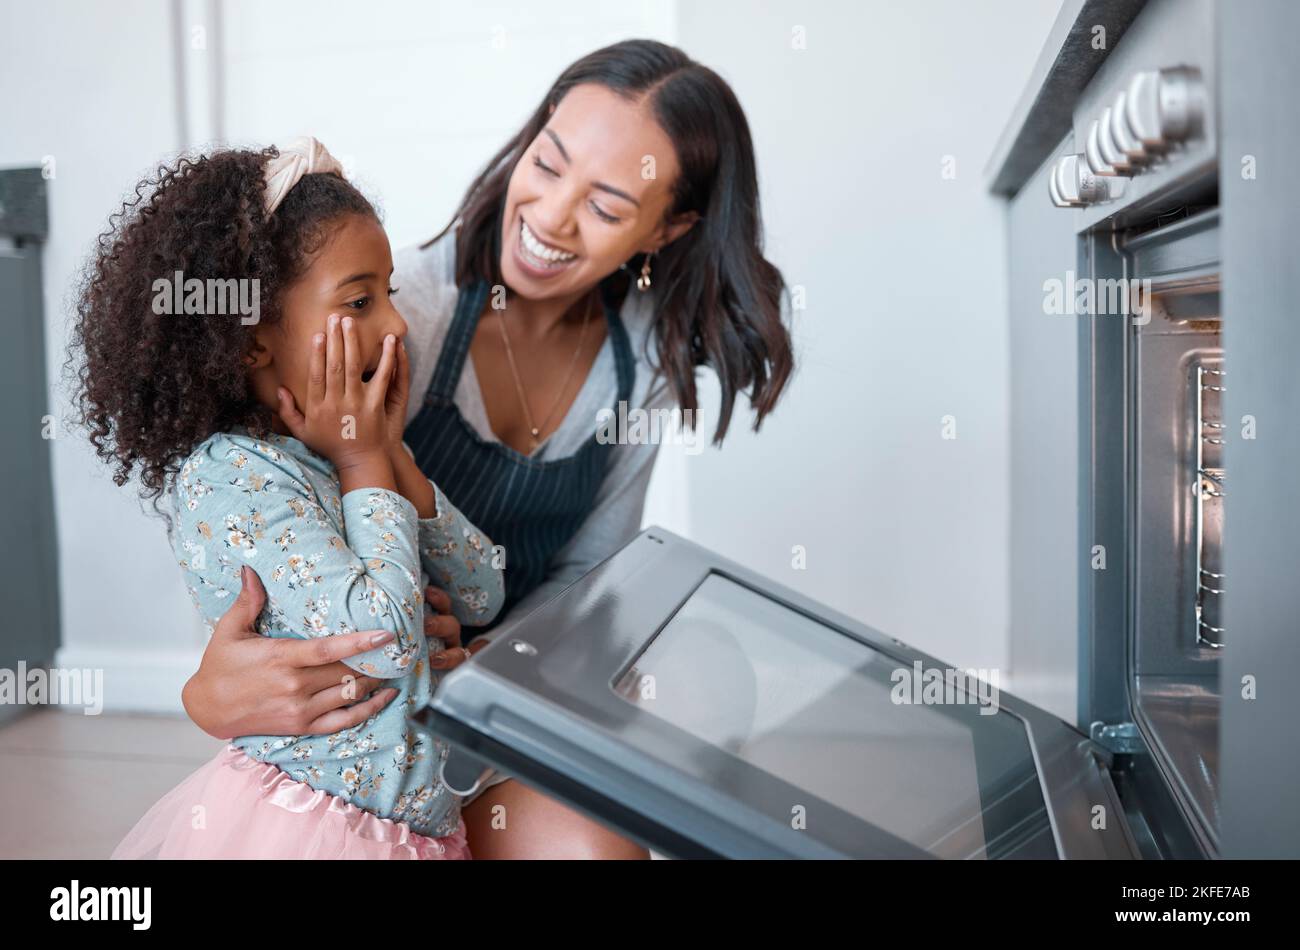 Woman, child and baking at the oven while waiting with surprise for food or baked food. Mother, daughter and kid using a convection stove or oven for Stock Photo